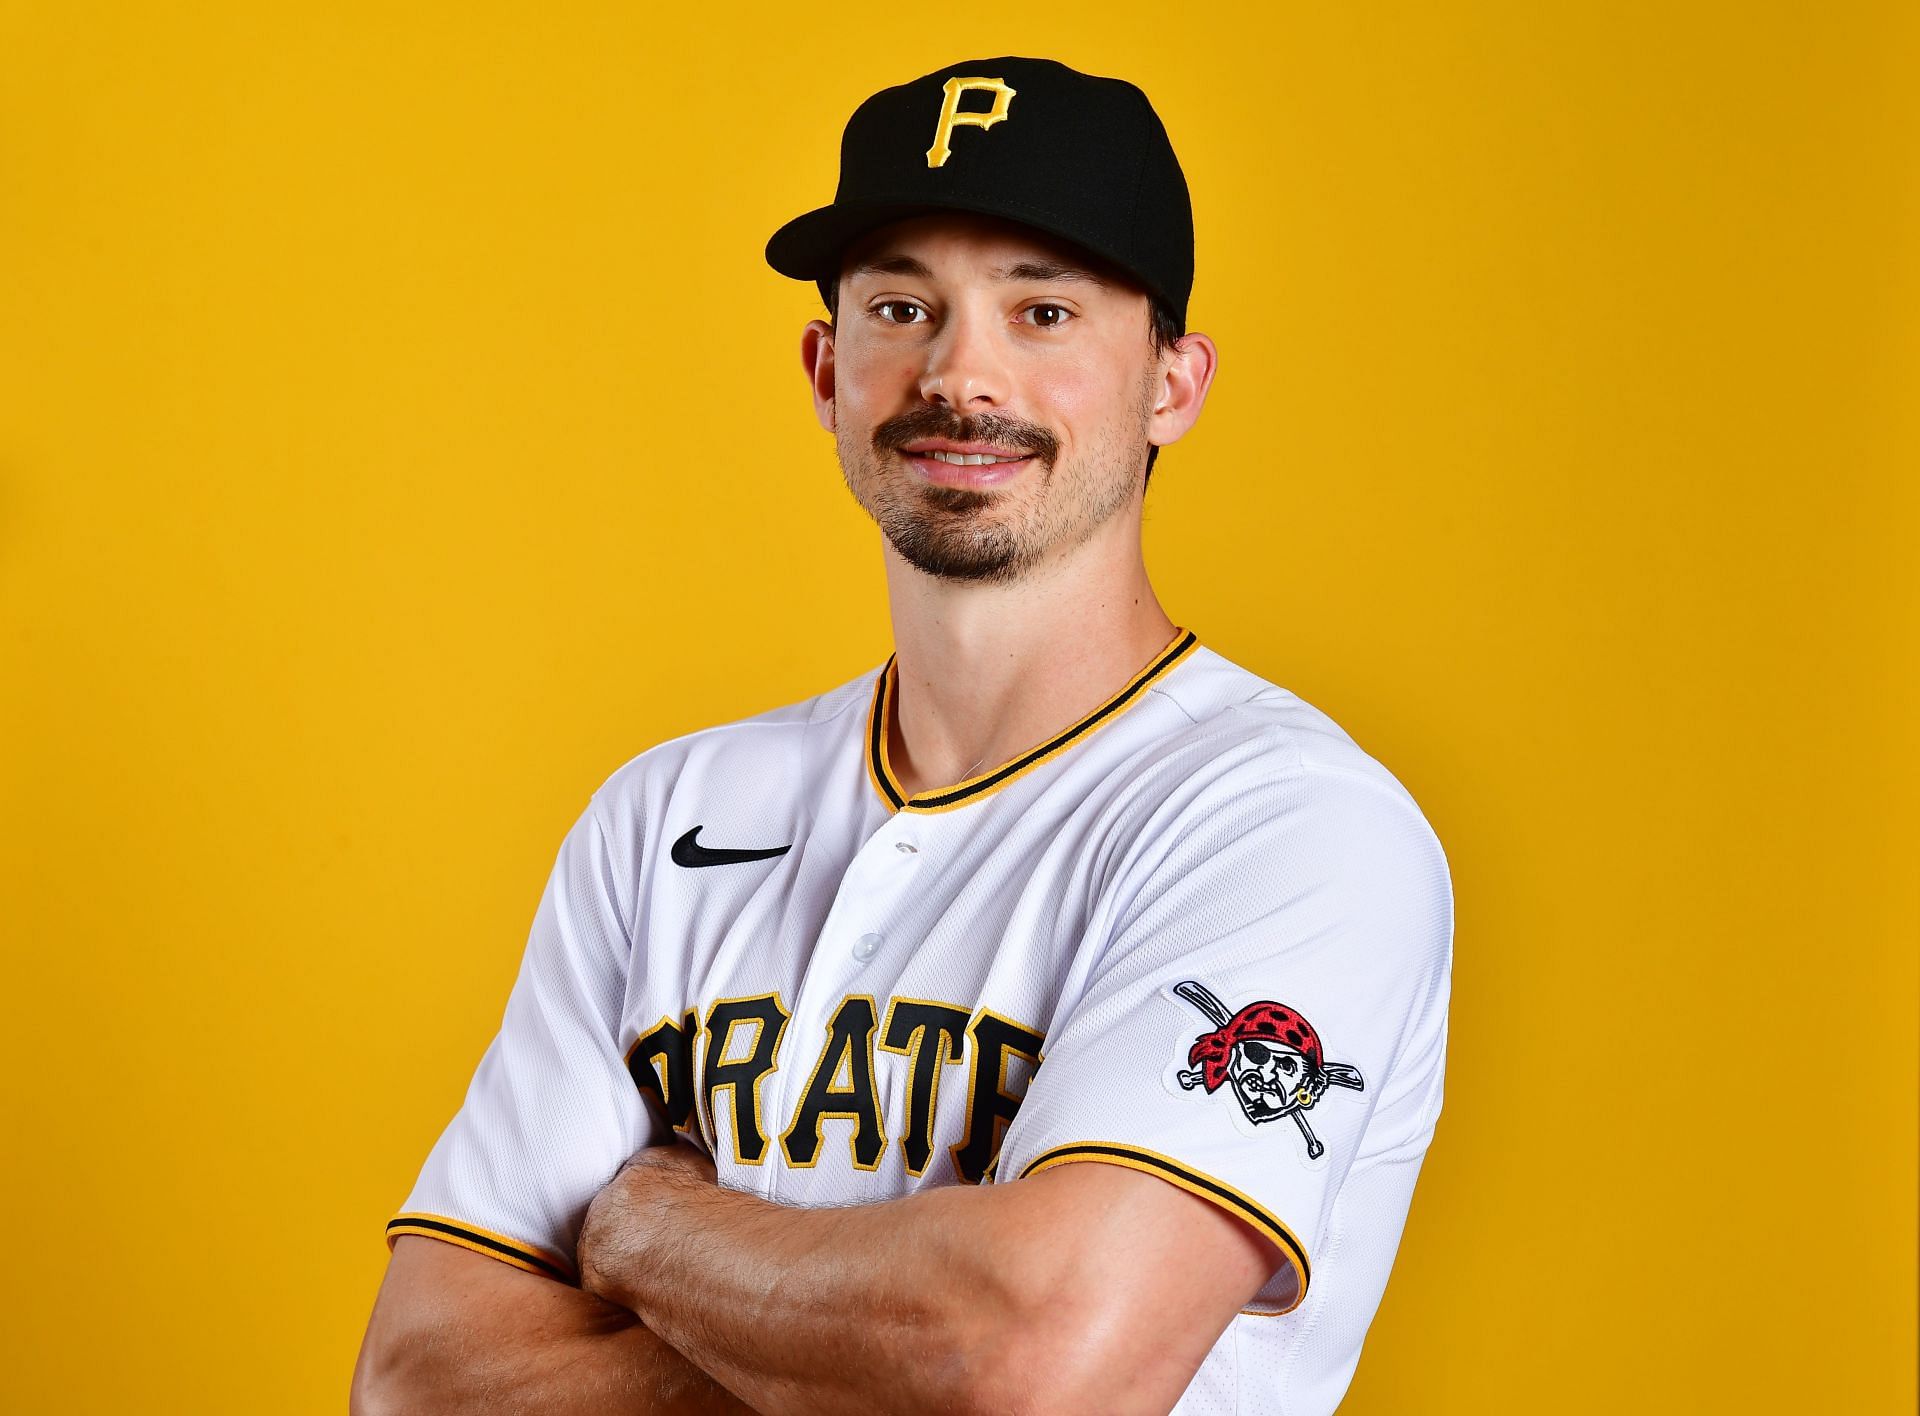 Bryan Reynolds of the Pittsburgh Pirates, a star outfielder the New York Yankees are reportedly interested in trading for this season